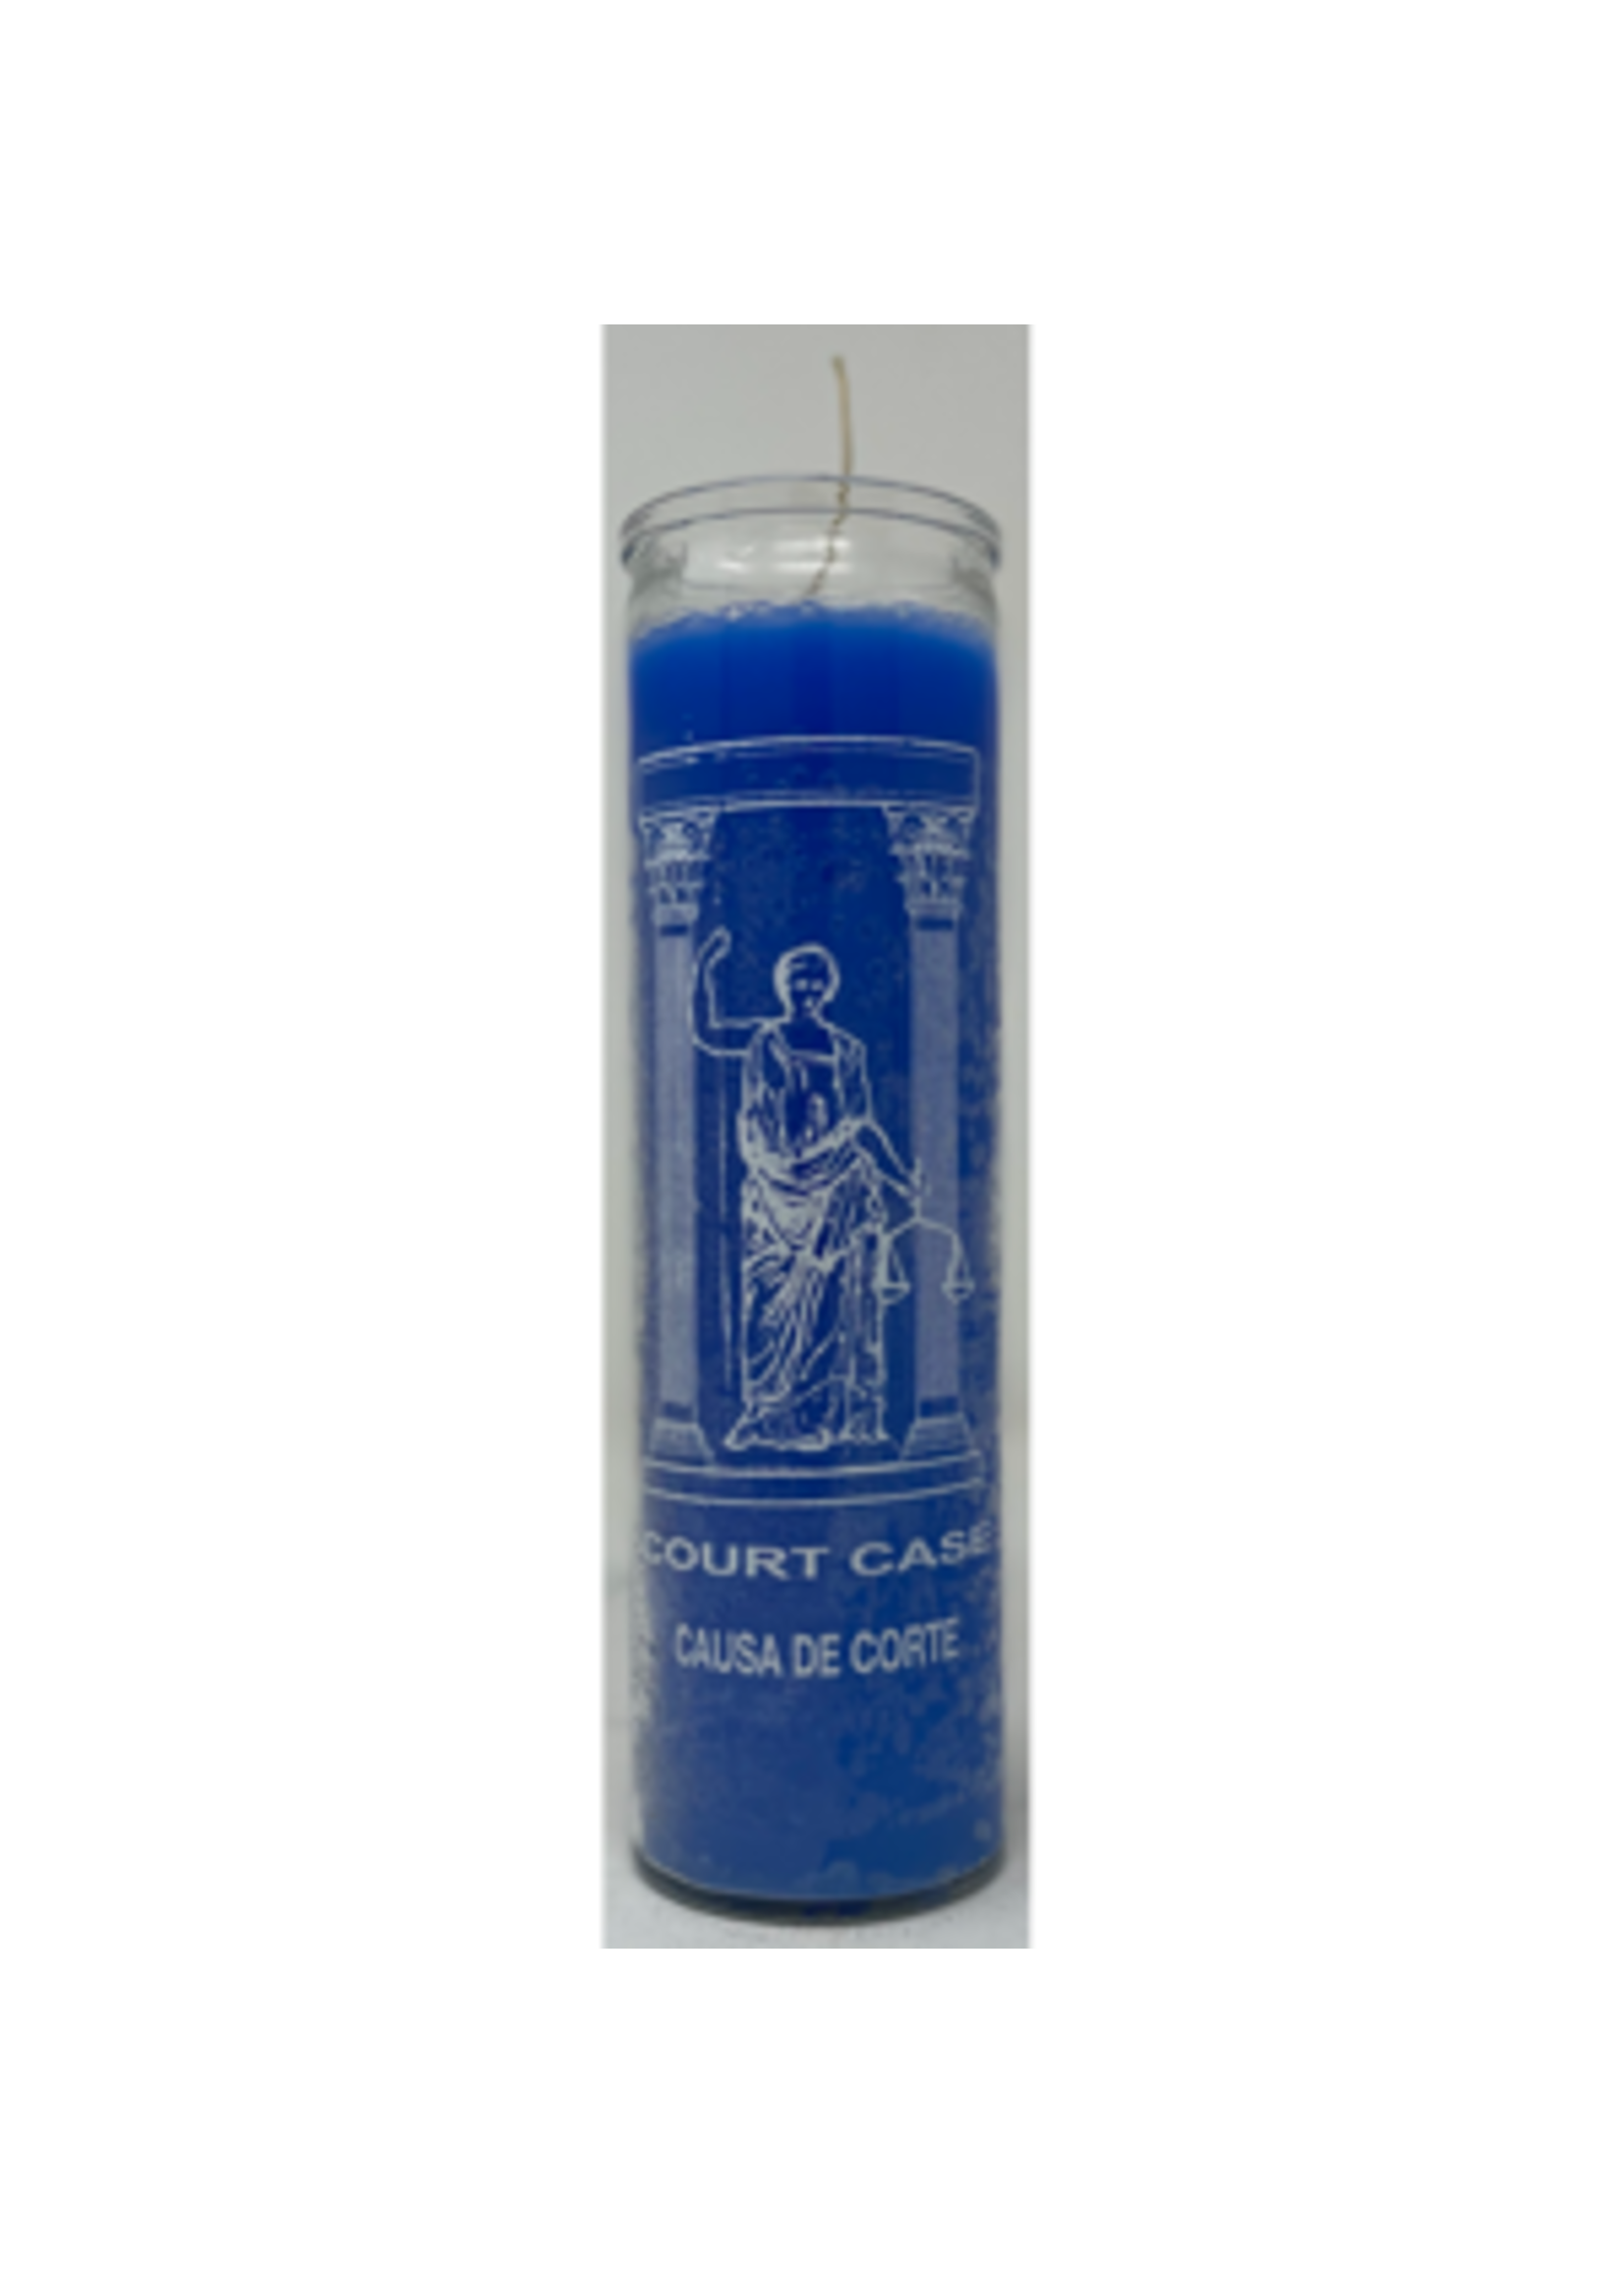 7 Day Jar Candle - Court Case (Blue)